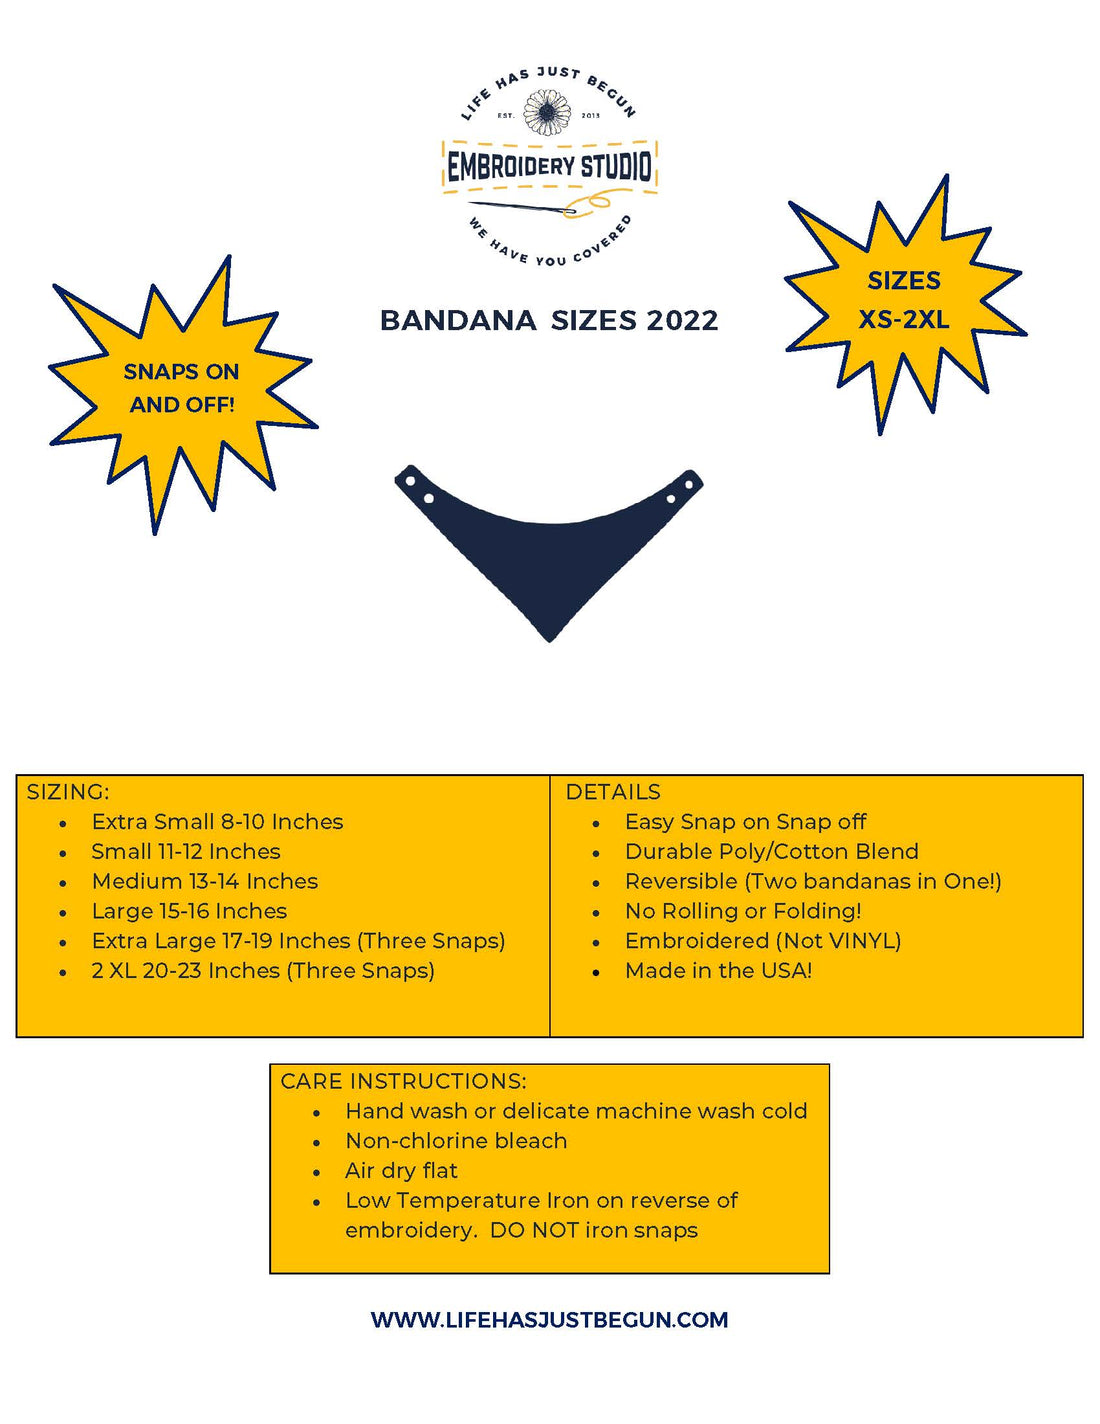 Dog bandana sizes, details and care instructions. - Life Has Just Begun